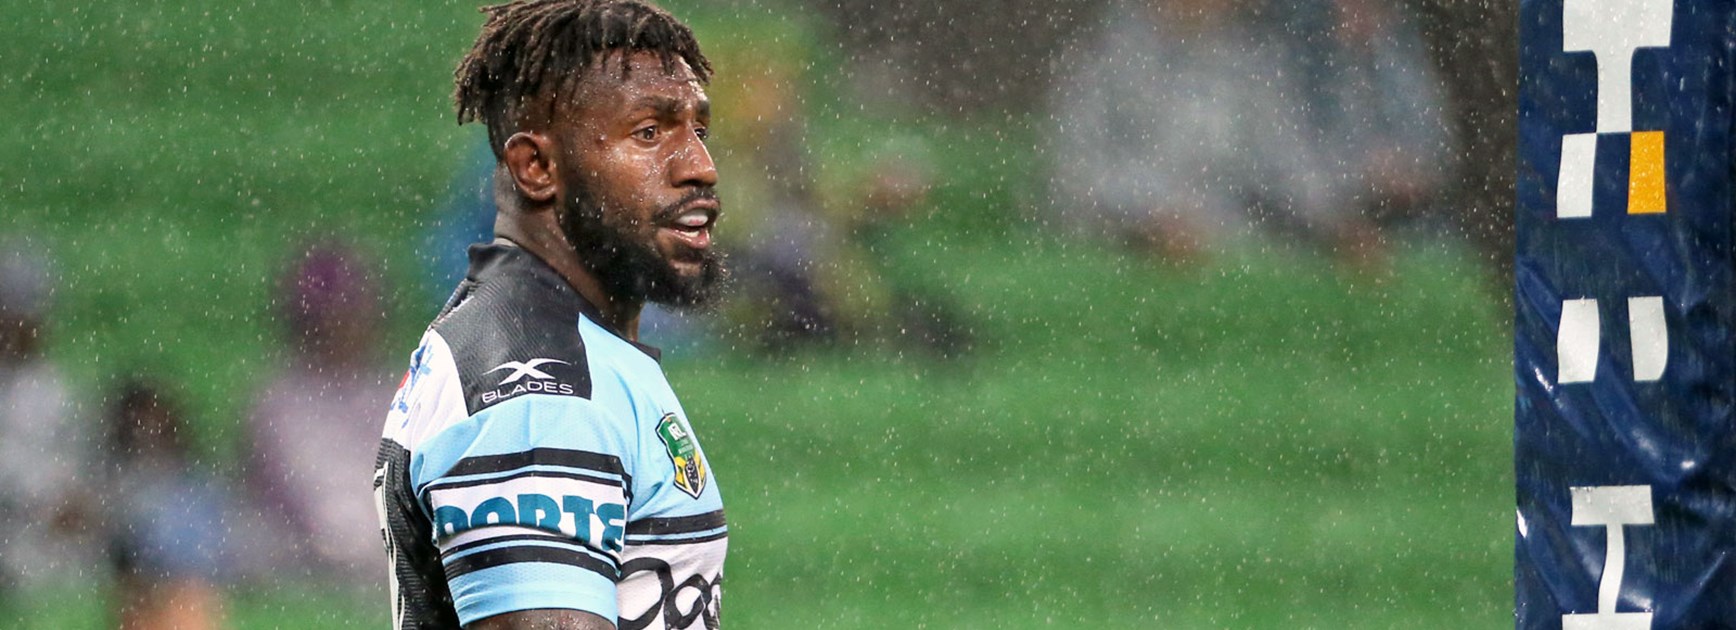 Sharks hooker James Segeyaro will be sidelined with a broken arm.